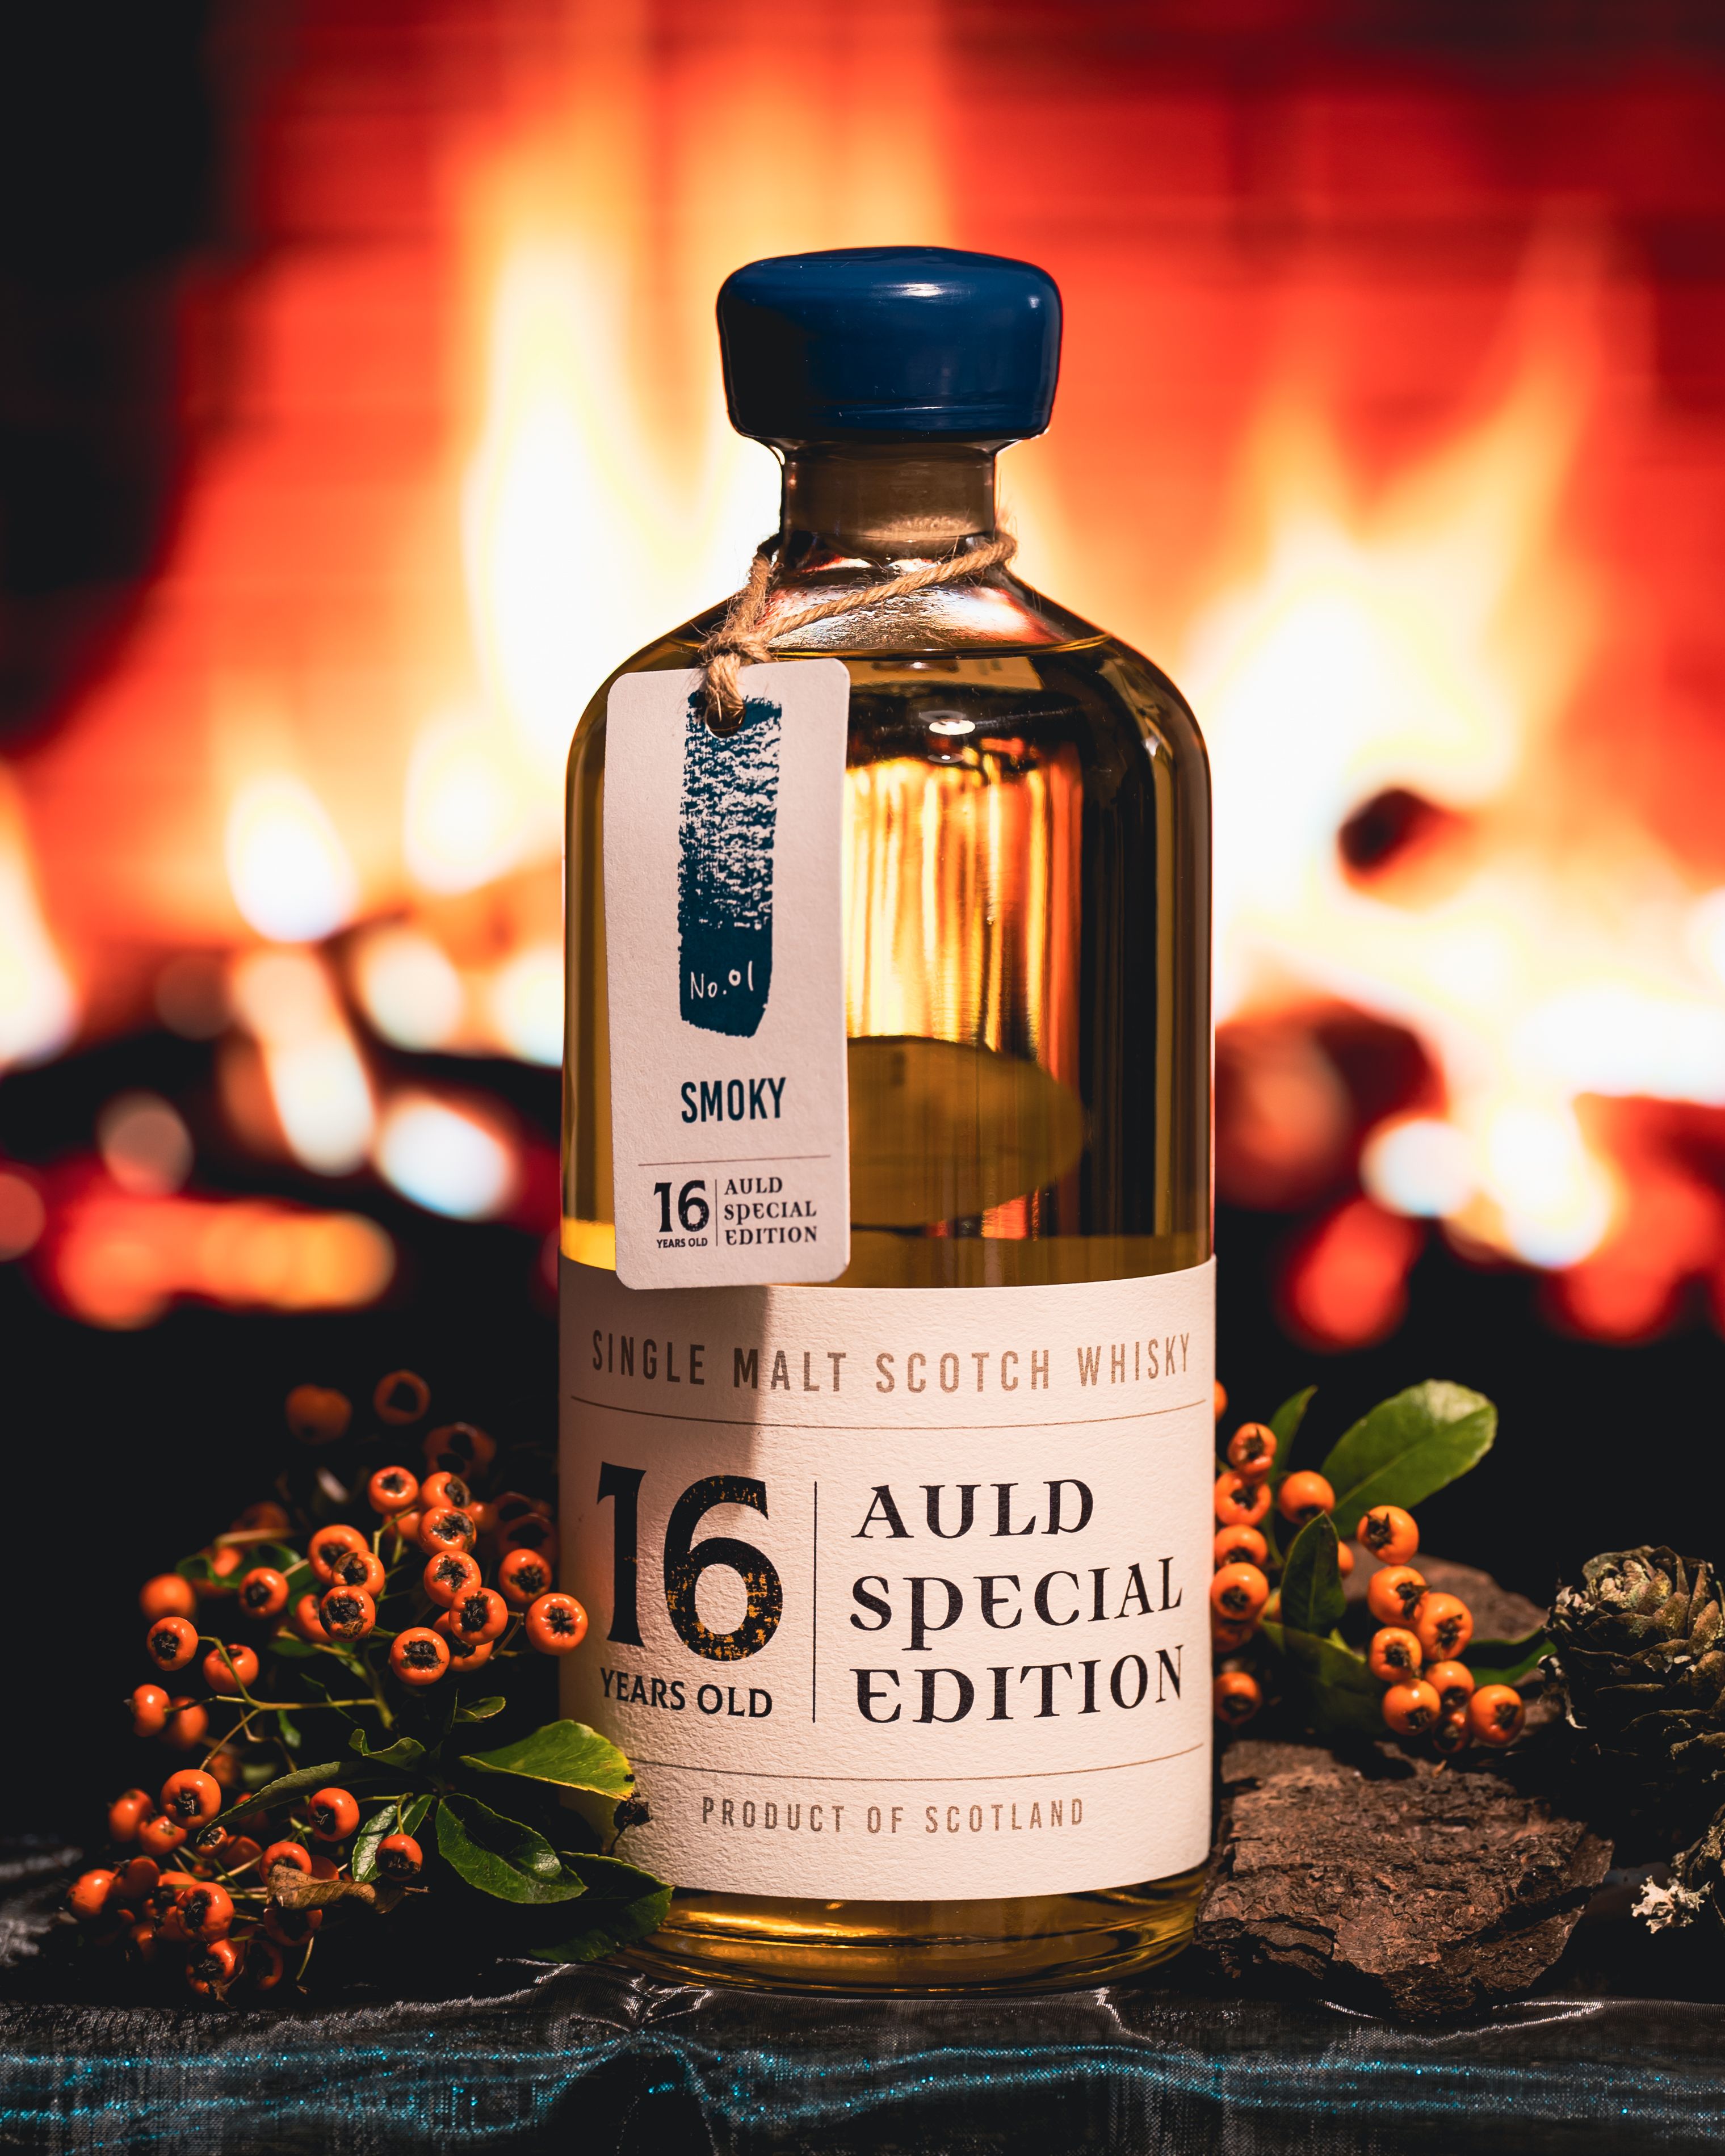 Auld Special Edition Smoky 16 Year-old Single Malt